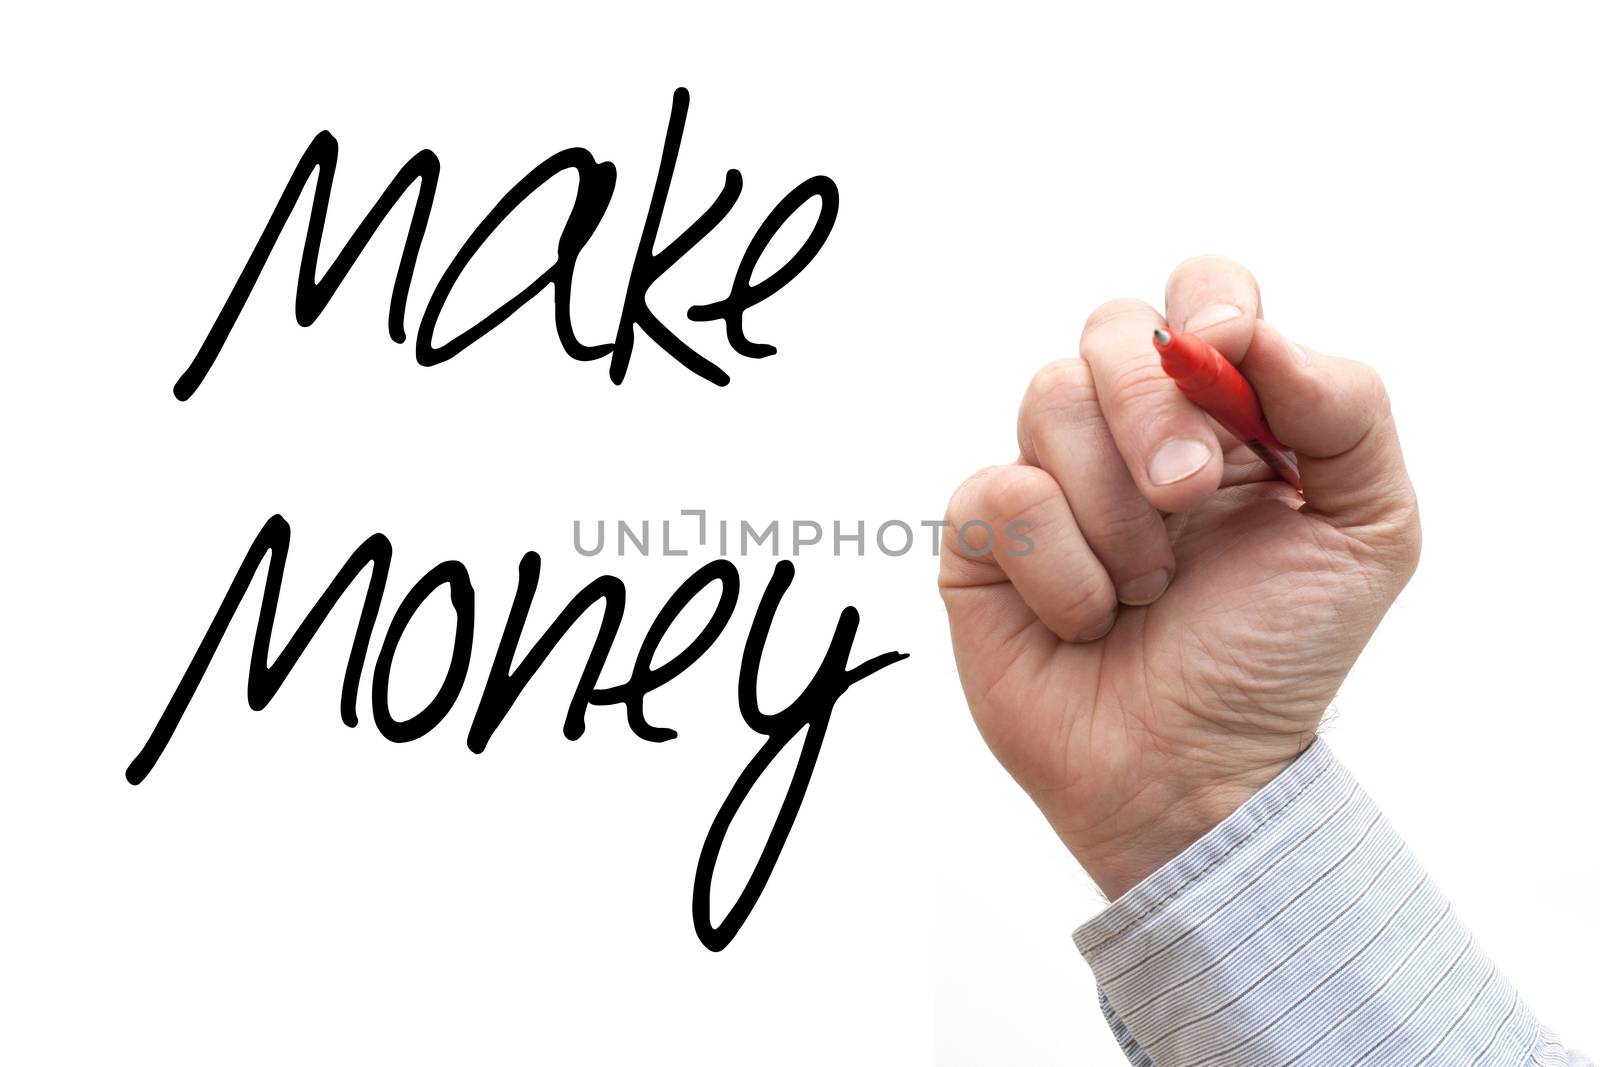 A Photo / Illustration of a Hand Writing 'Make Money'